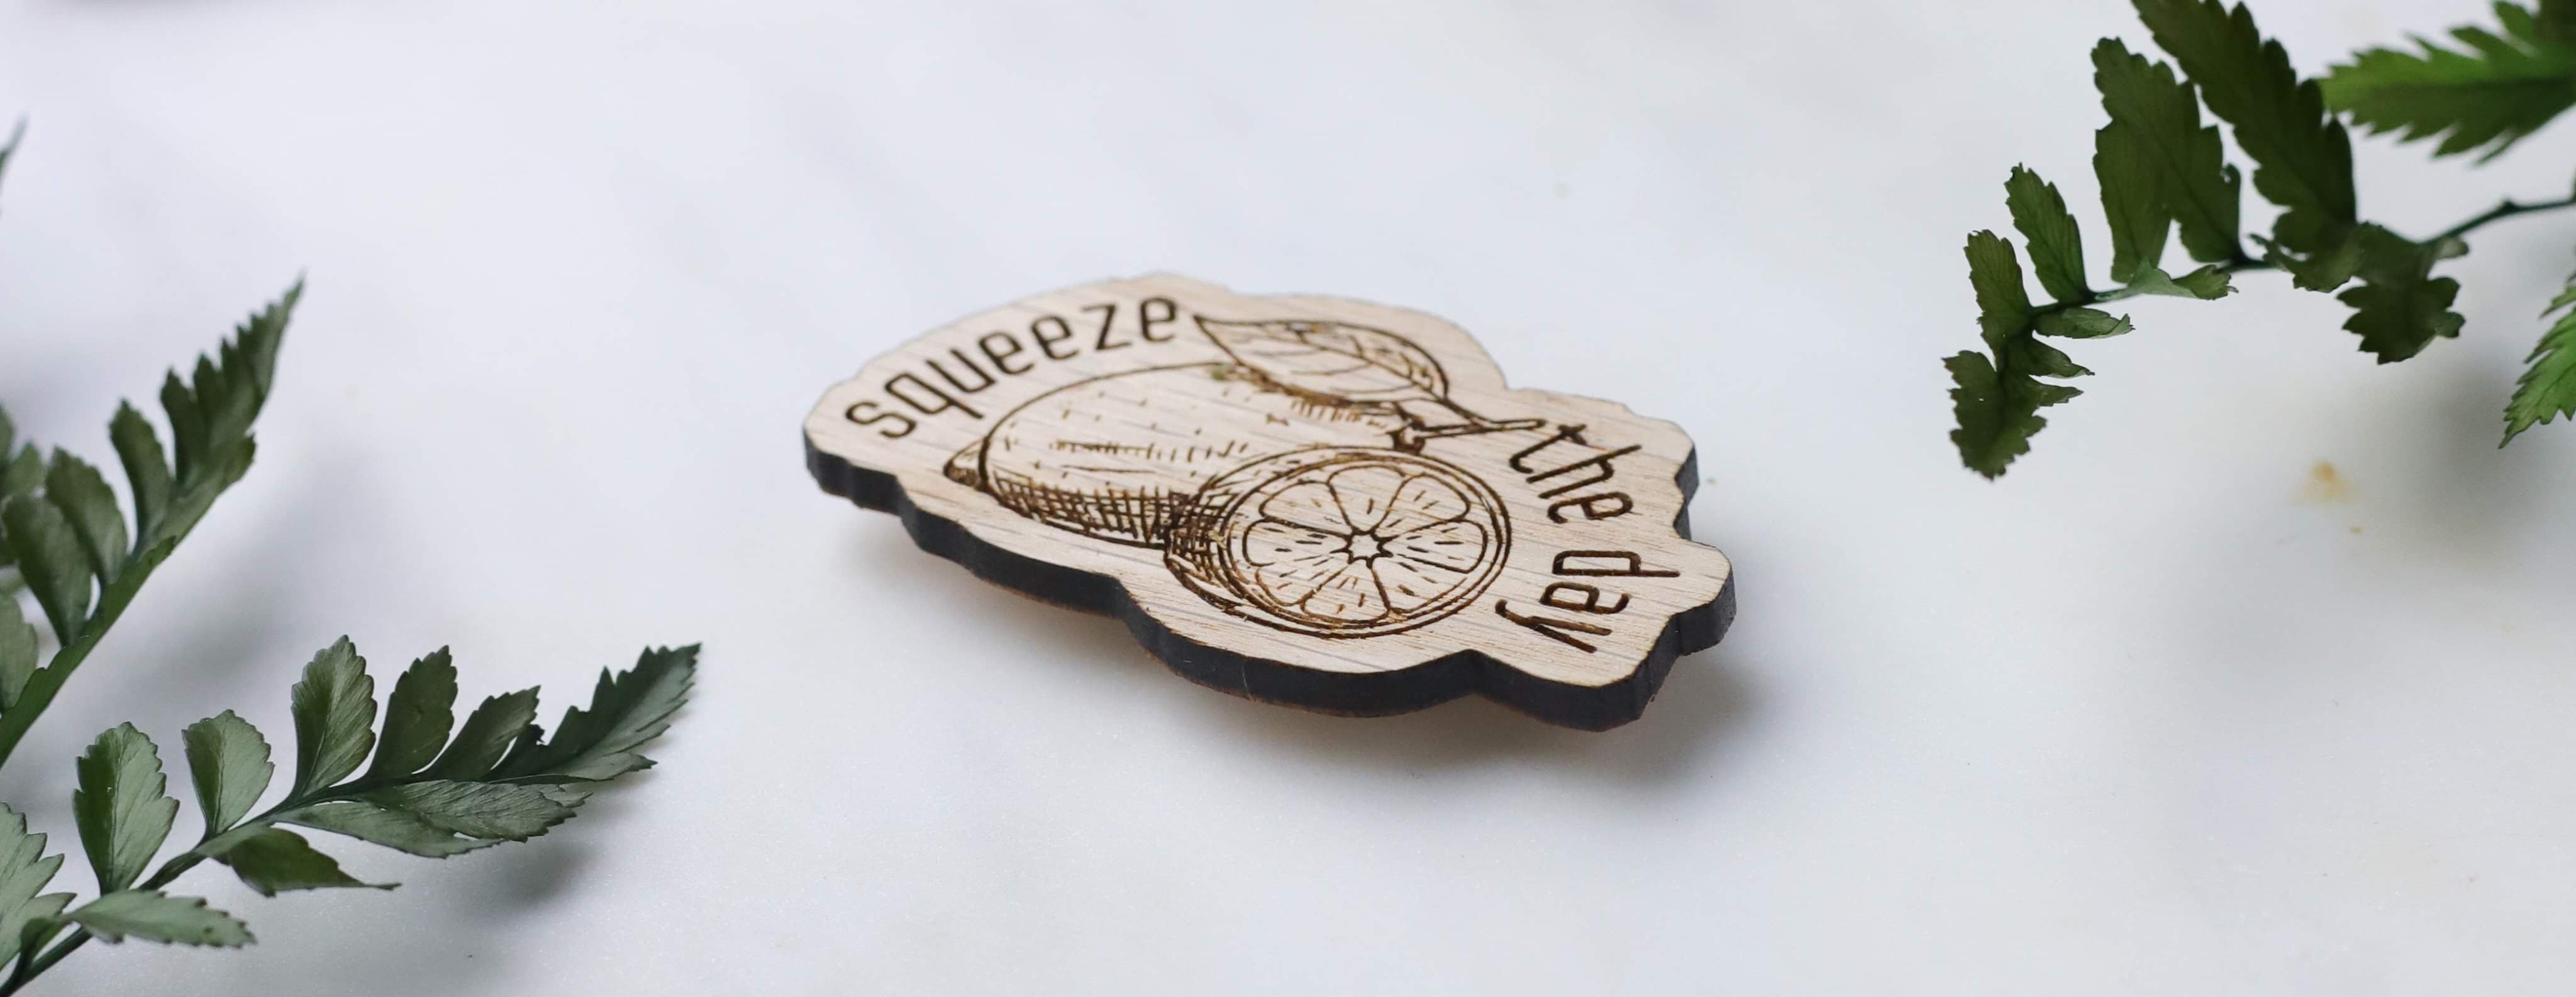 “Squeeze The Day” Wooden Kitchen Magnet